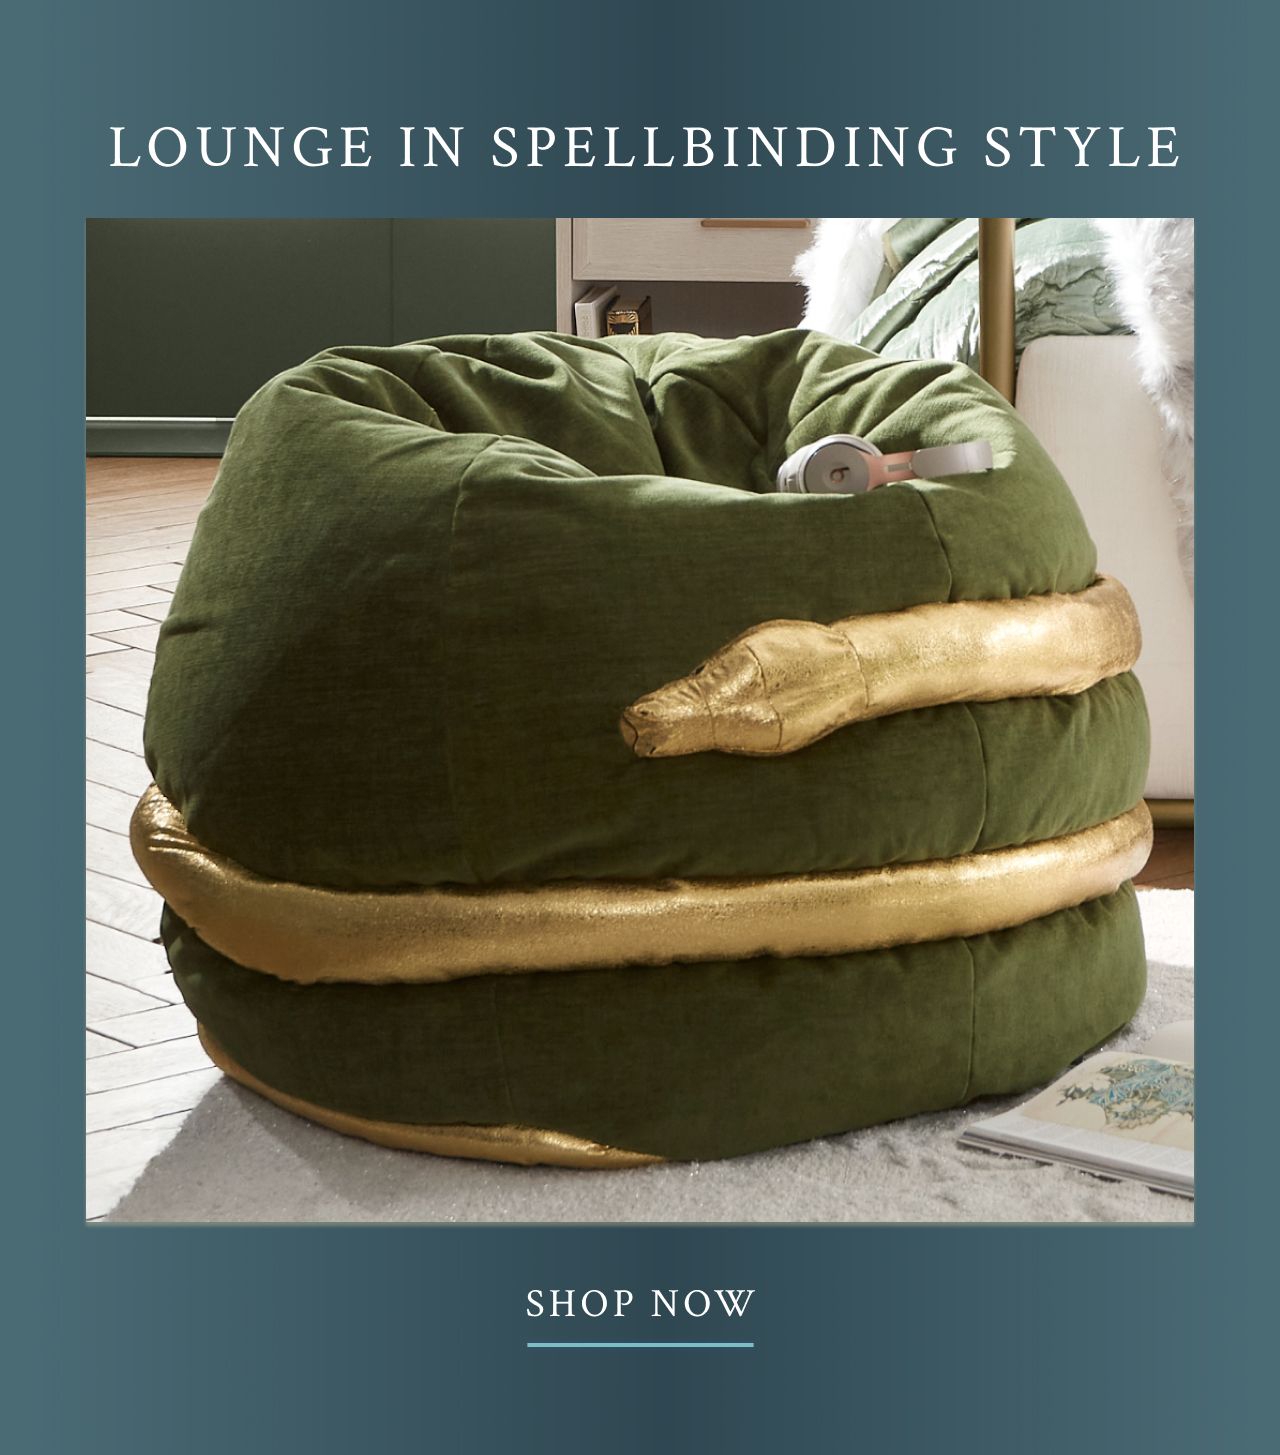 Lounge in Spellbinding Style. Shop Now